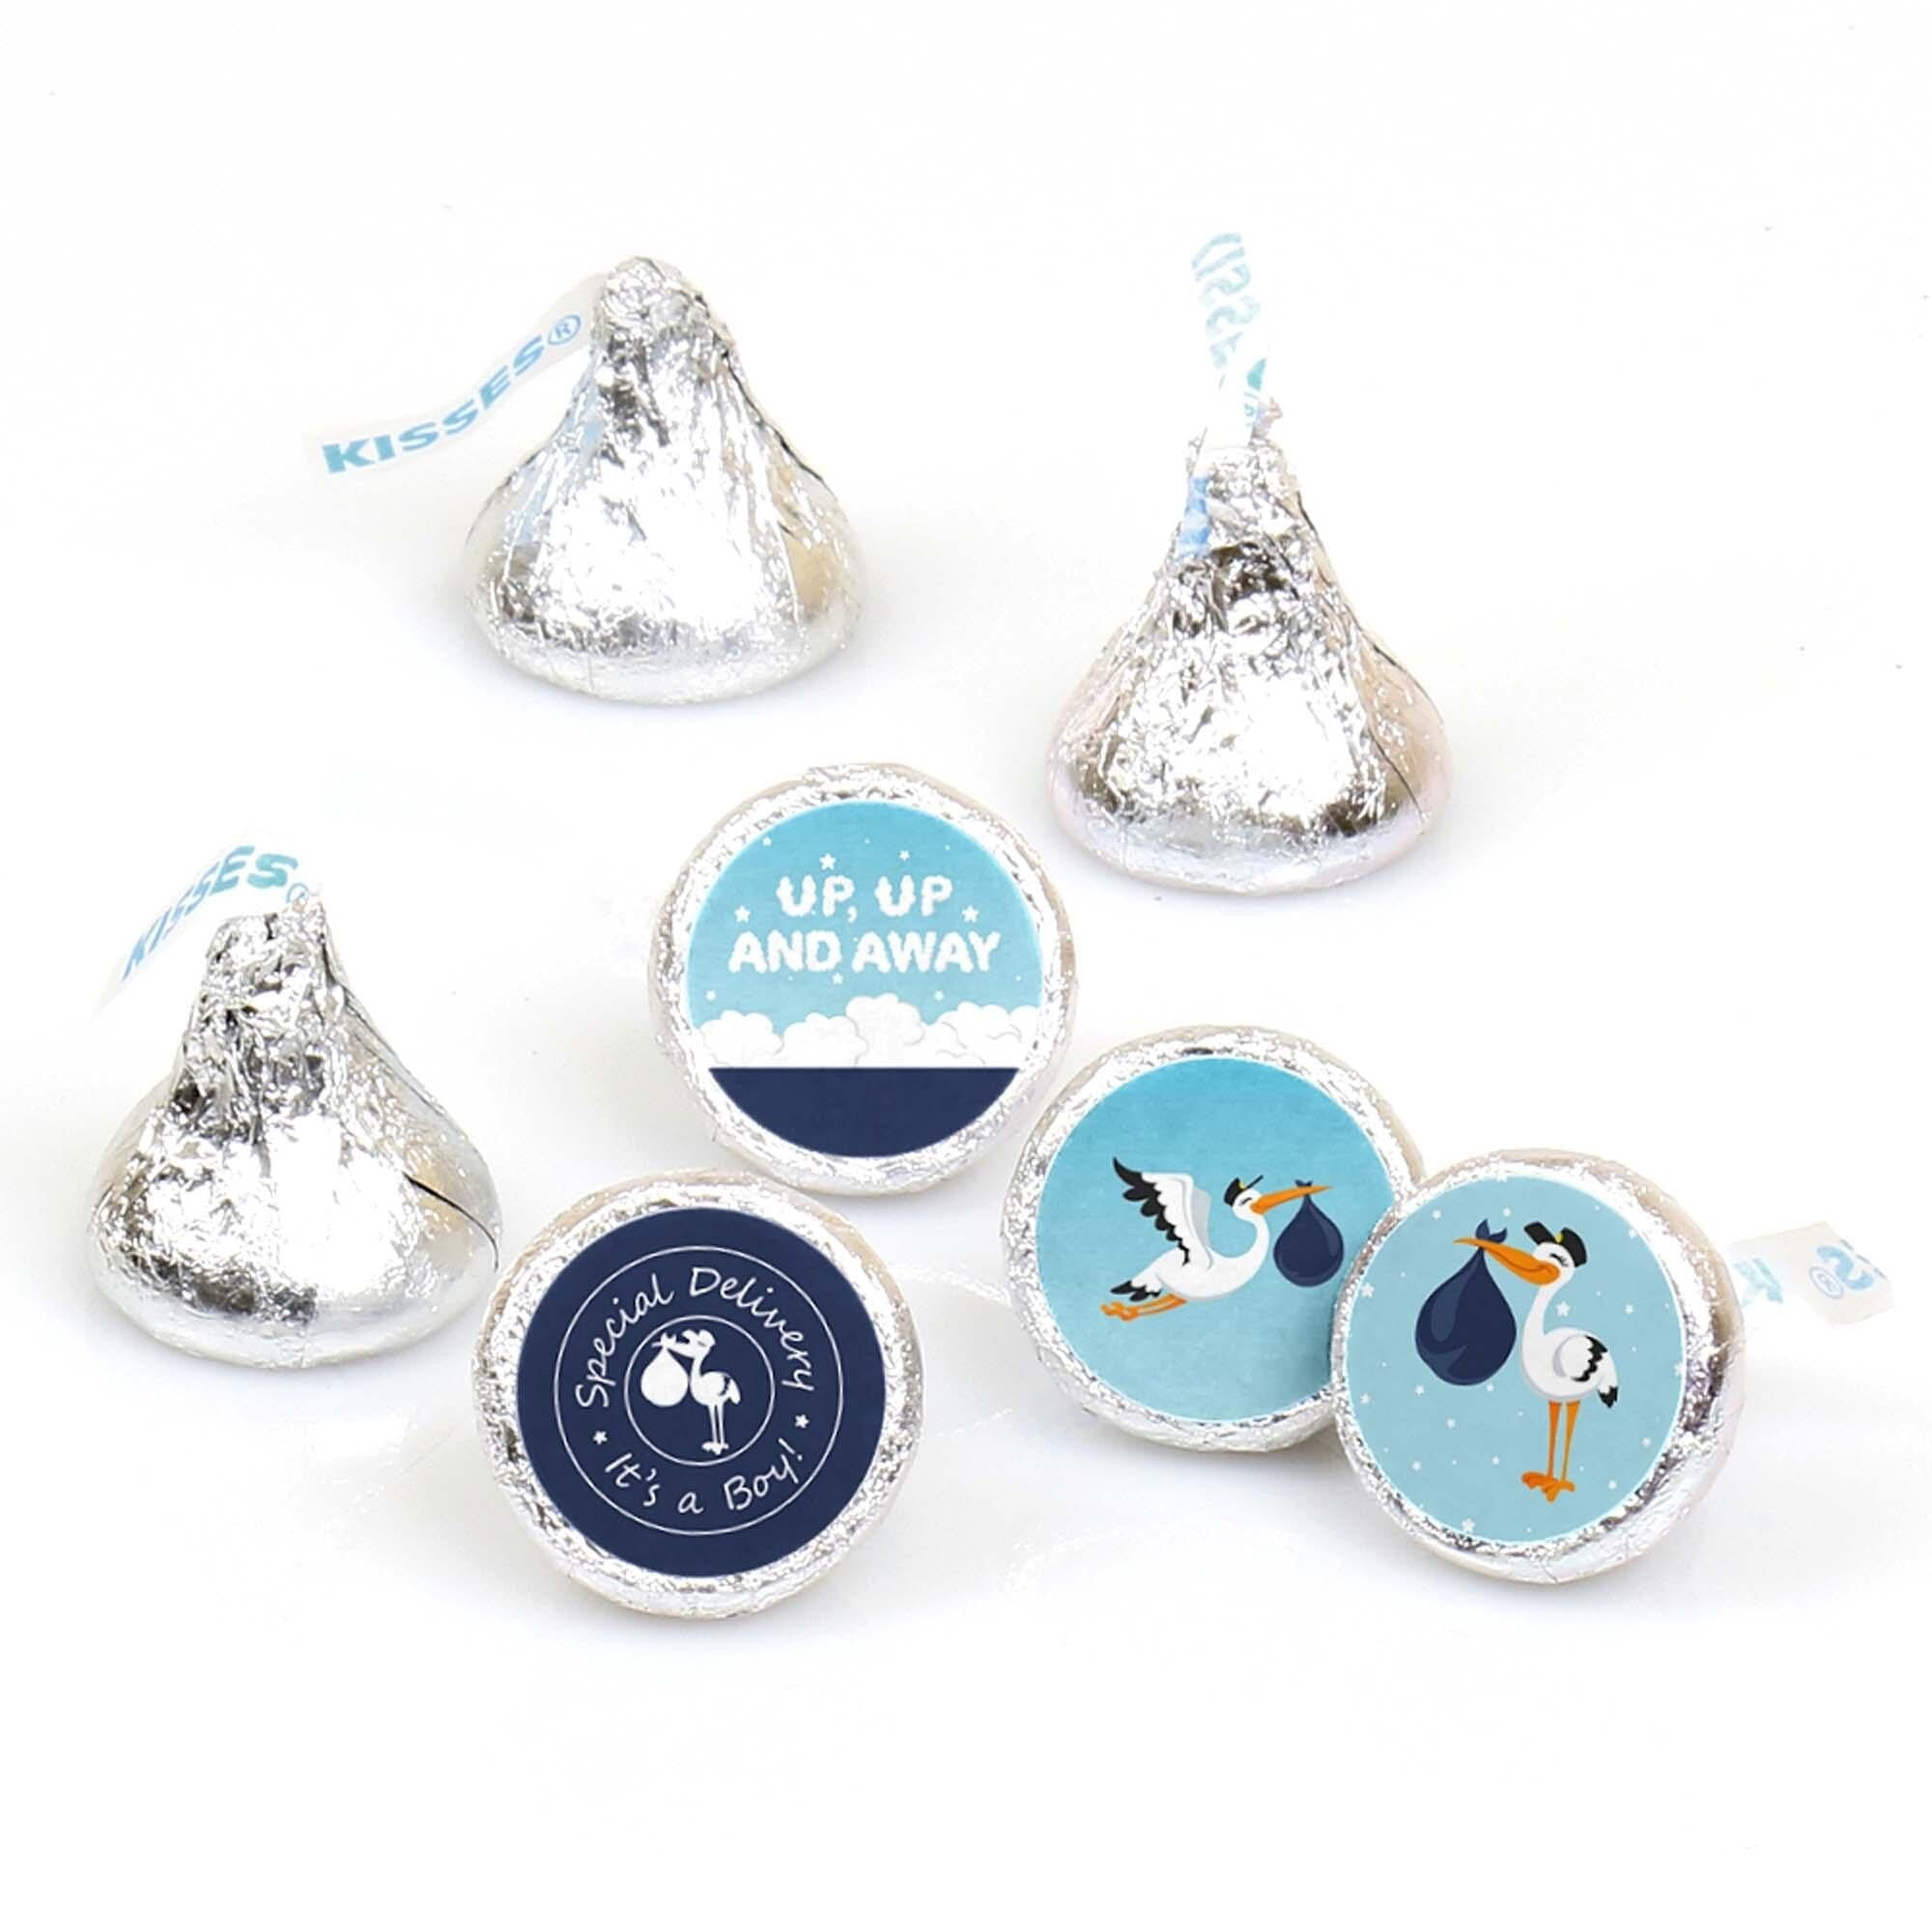 108 IT'S A BOY BABY SHOWER Party Favors Stickers Labels for Hershey Kiss 